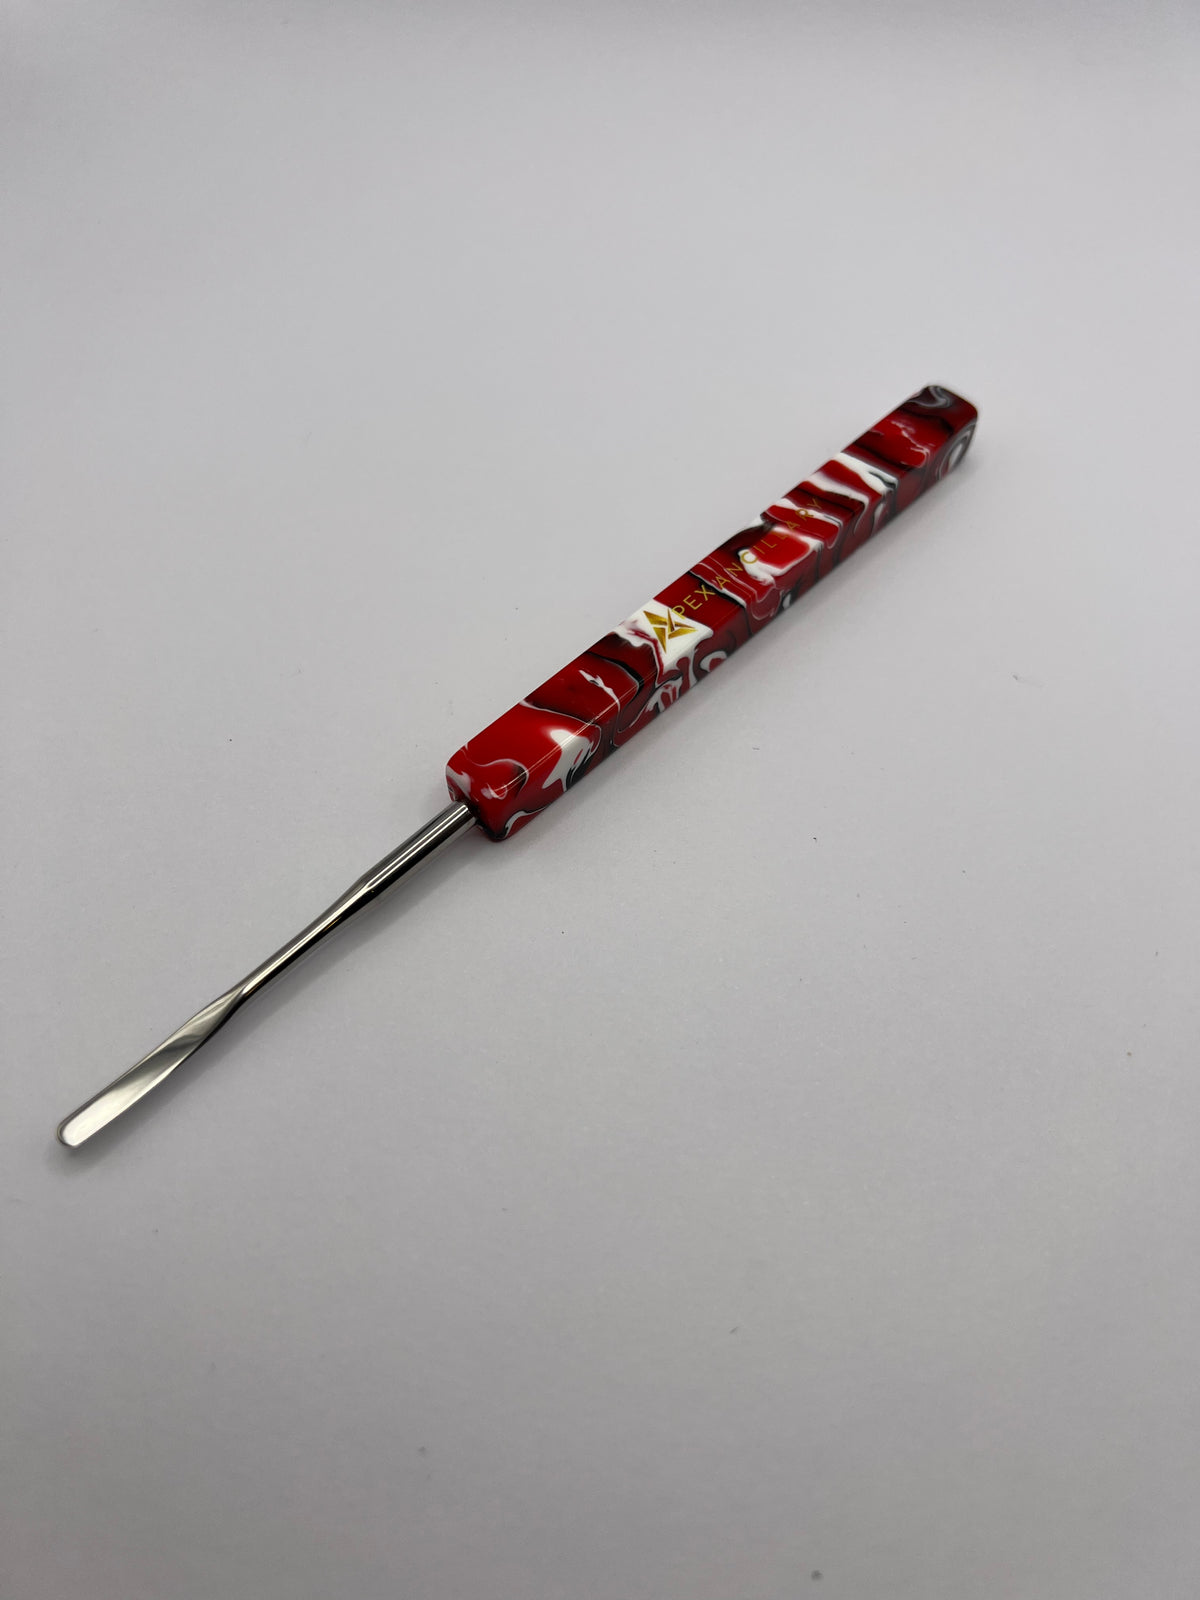 Apex Ancillary Epoxy Resin Handle Carving Tool | Stainless Steel Paddle Tip | Great for Whipping, Scooping, & More